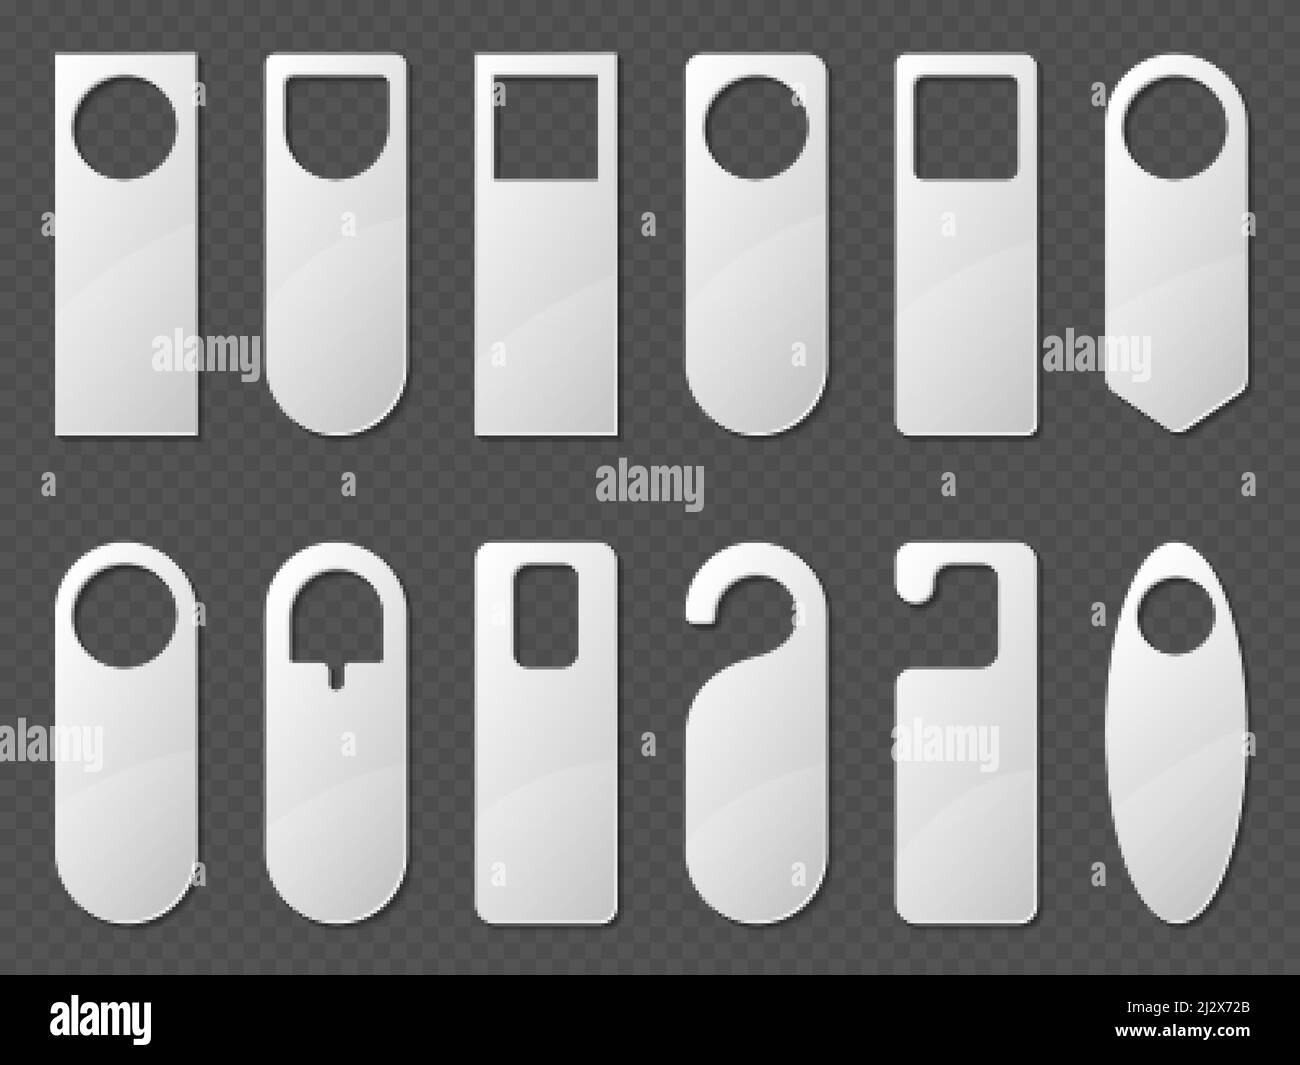 Door hangers mockup set. Blank paper or plastic empty labels of various shapes for hotel doorknob room, dont disturb signs, messages on entrance knobs Stock Vector